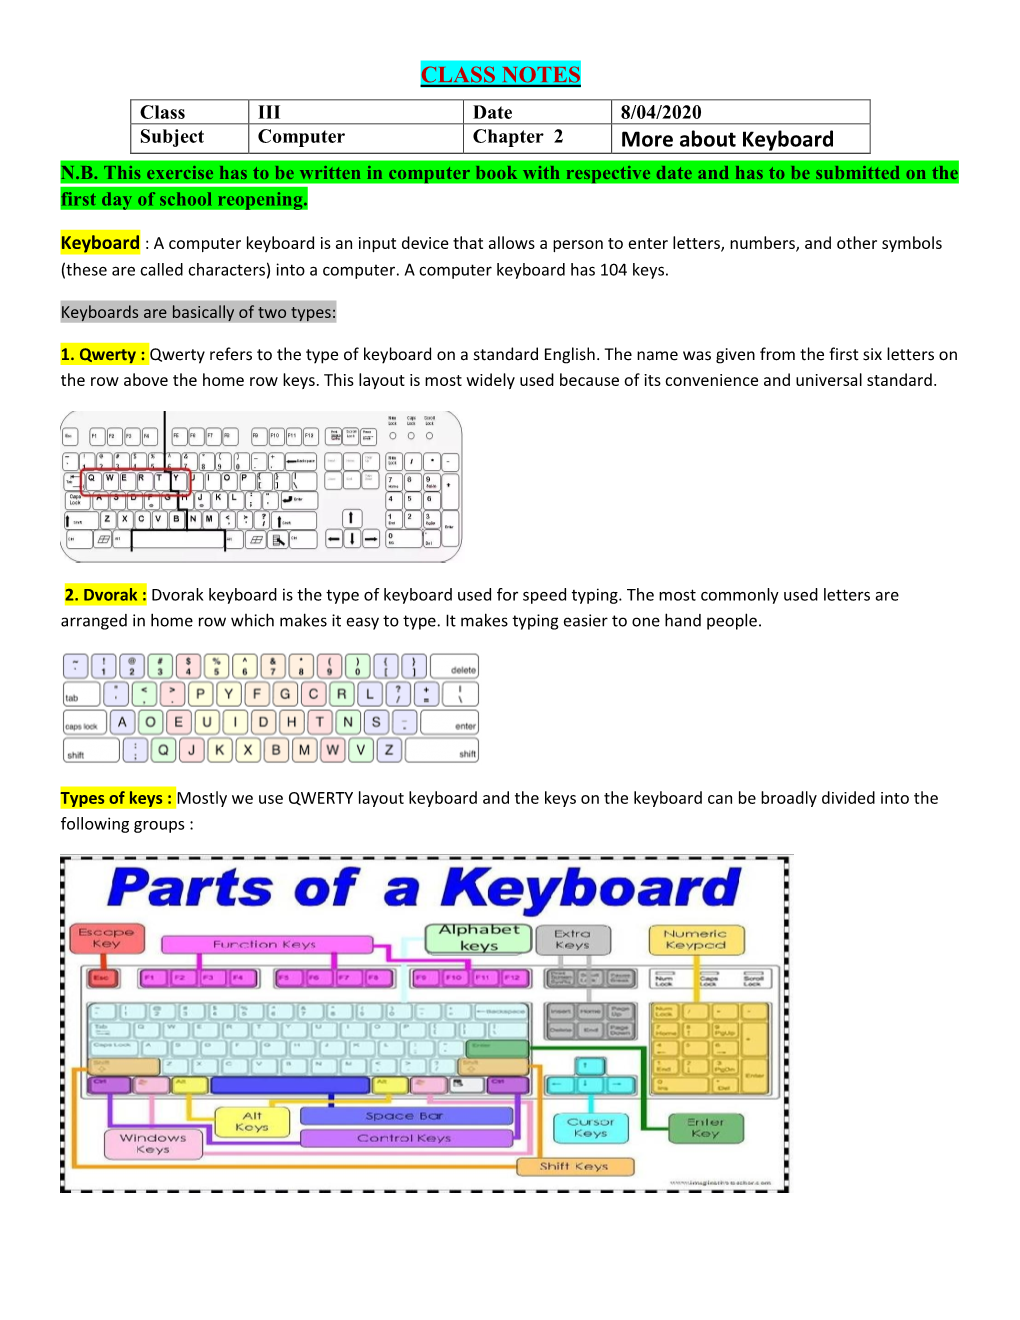 CLASS NOTES More About Keyboard